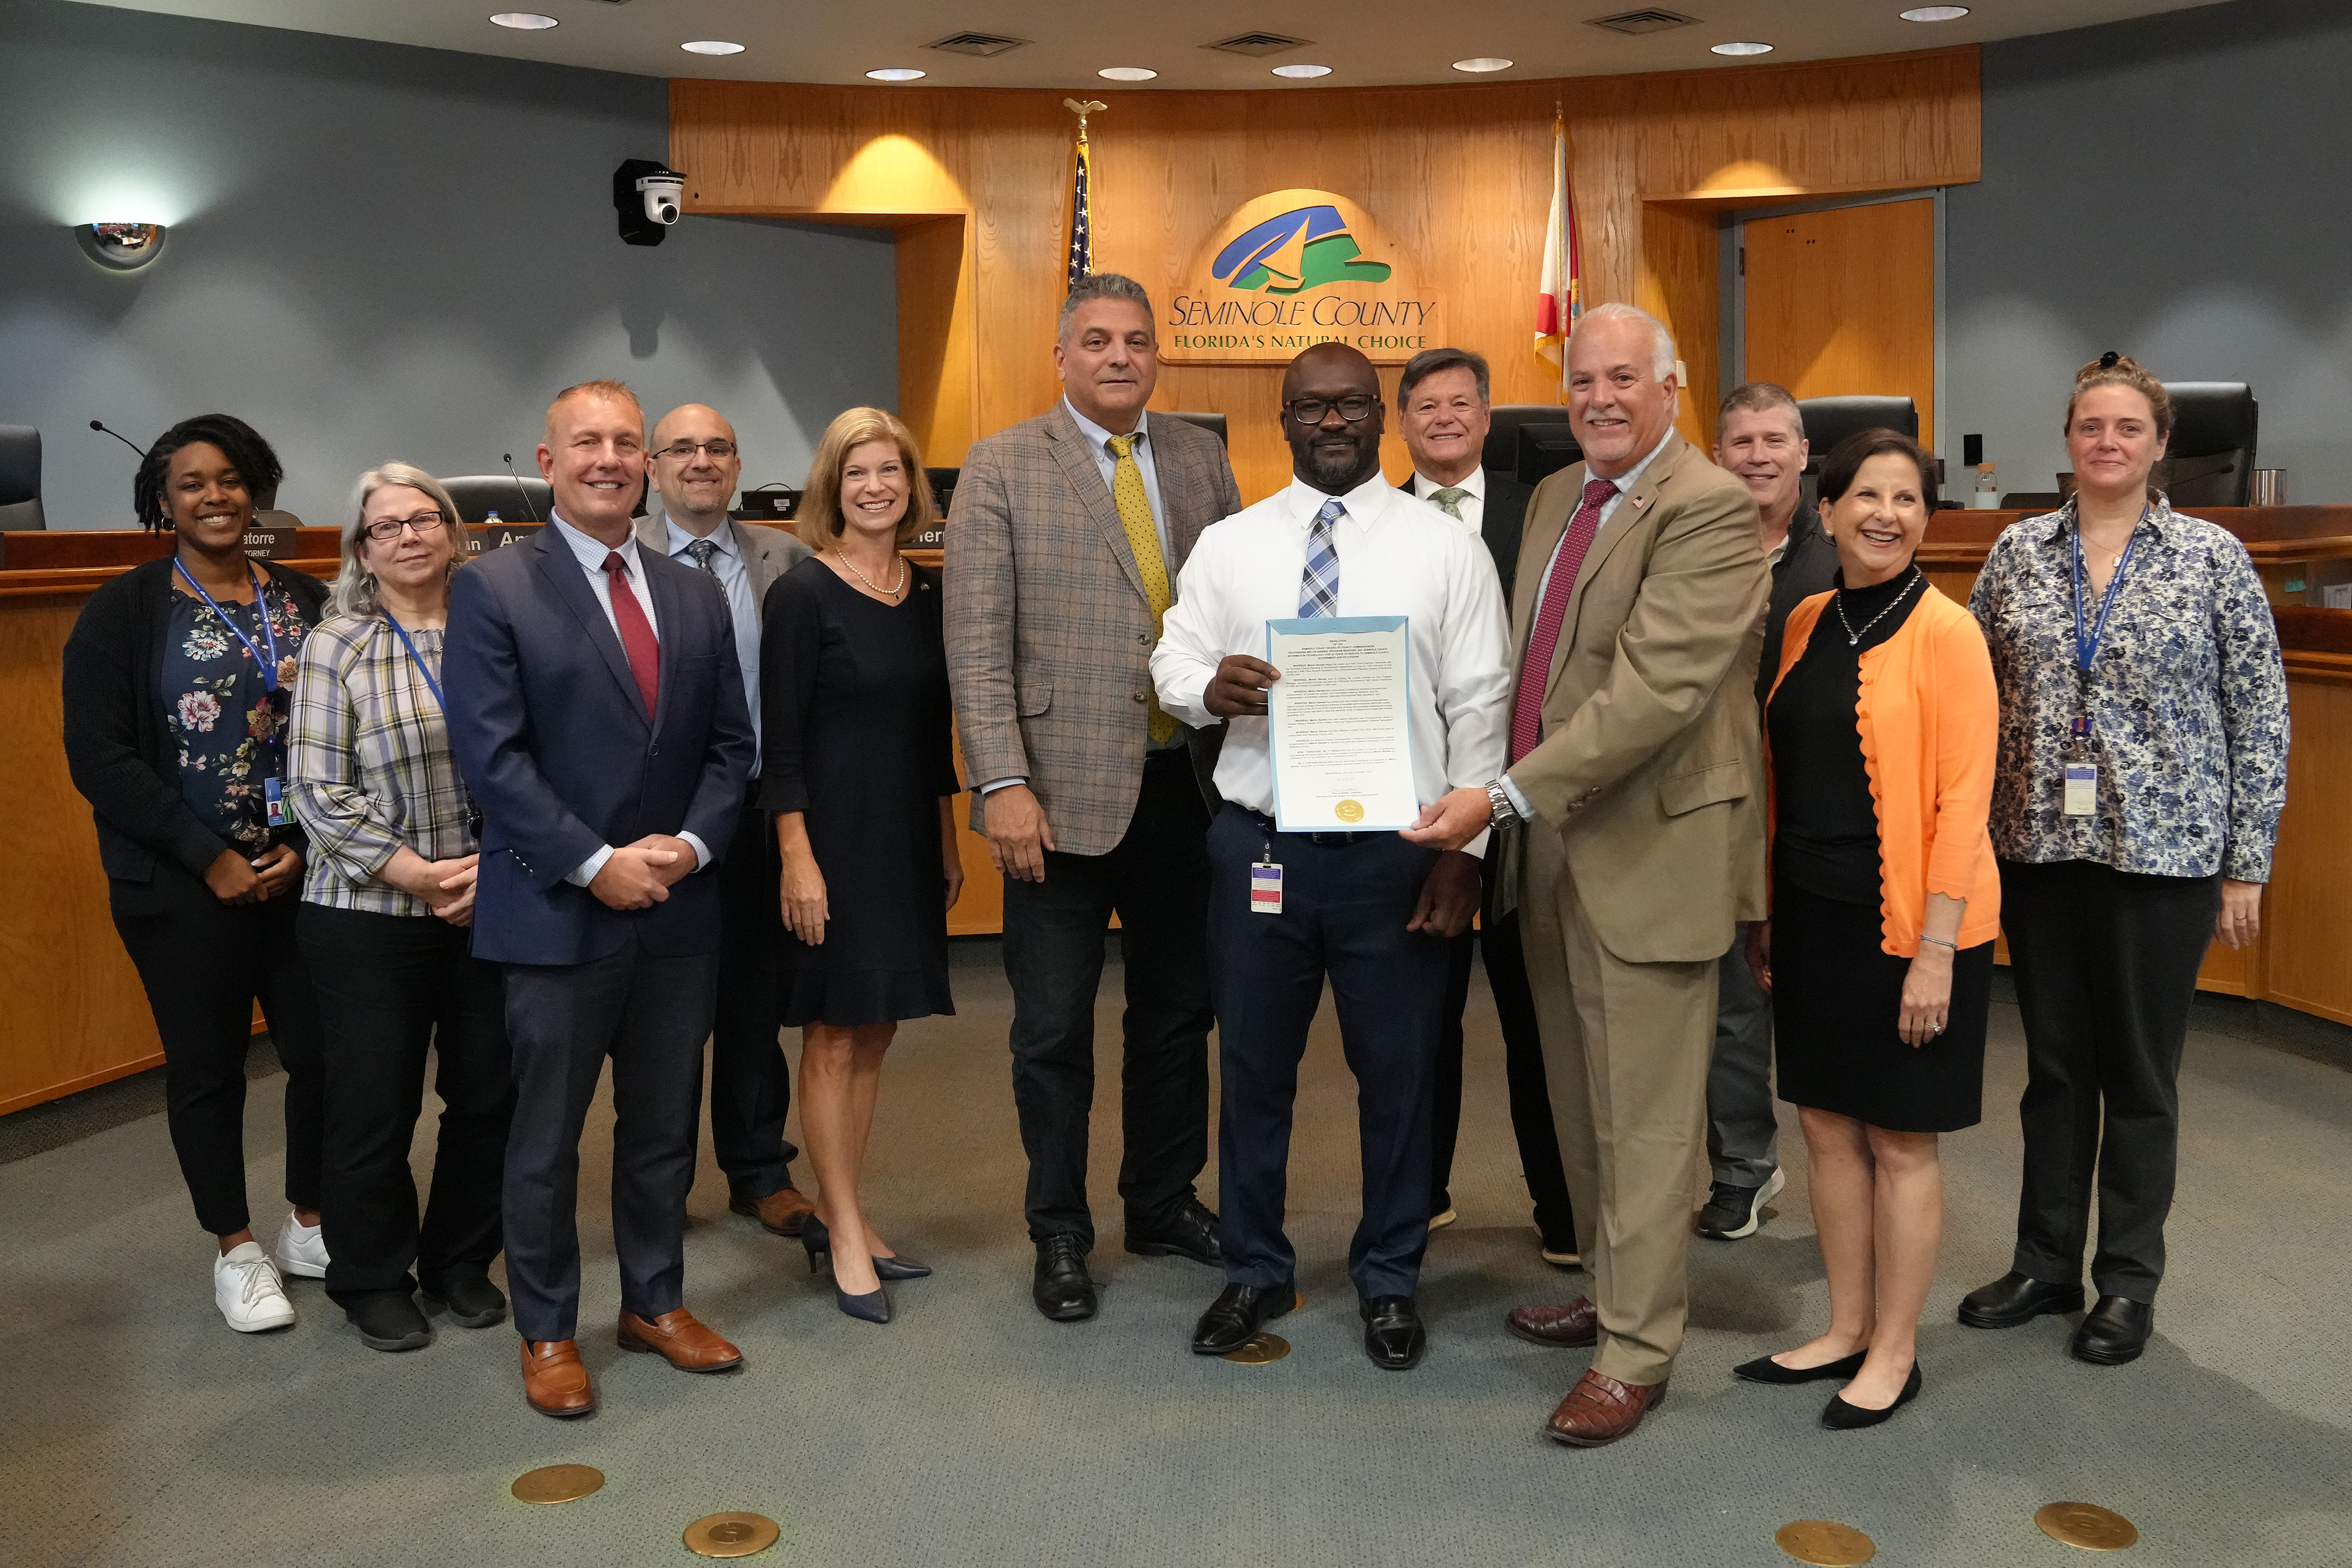 Resolution - Recognizing Melvin Barnes, Program Manager, GIS, Seminole County Information Technology, for 30 years of service to Seminole County Government and its citizens